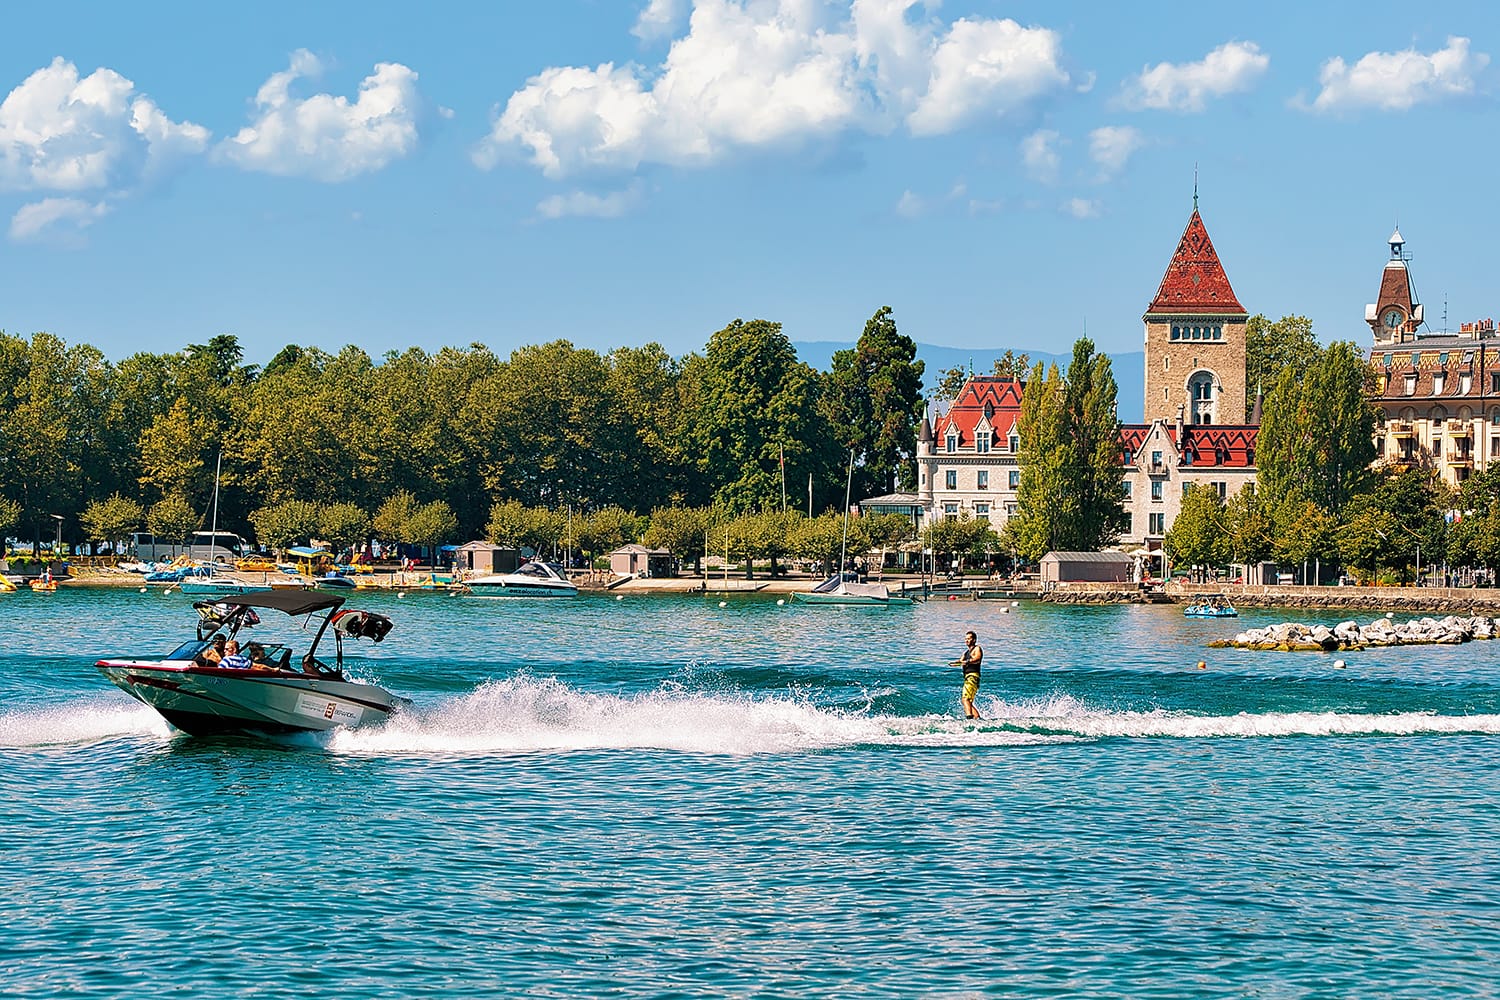 Motorboat with man wakeboarding on Lake Geneva embankment near Chateau Ouchy in Lausanne, Switzerland.